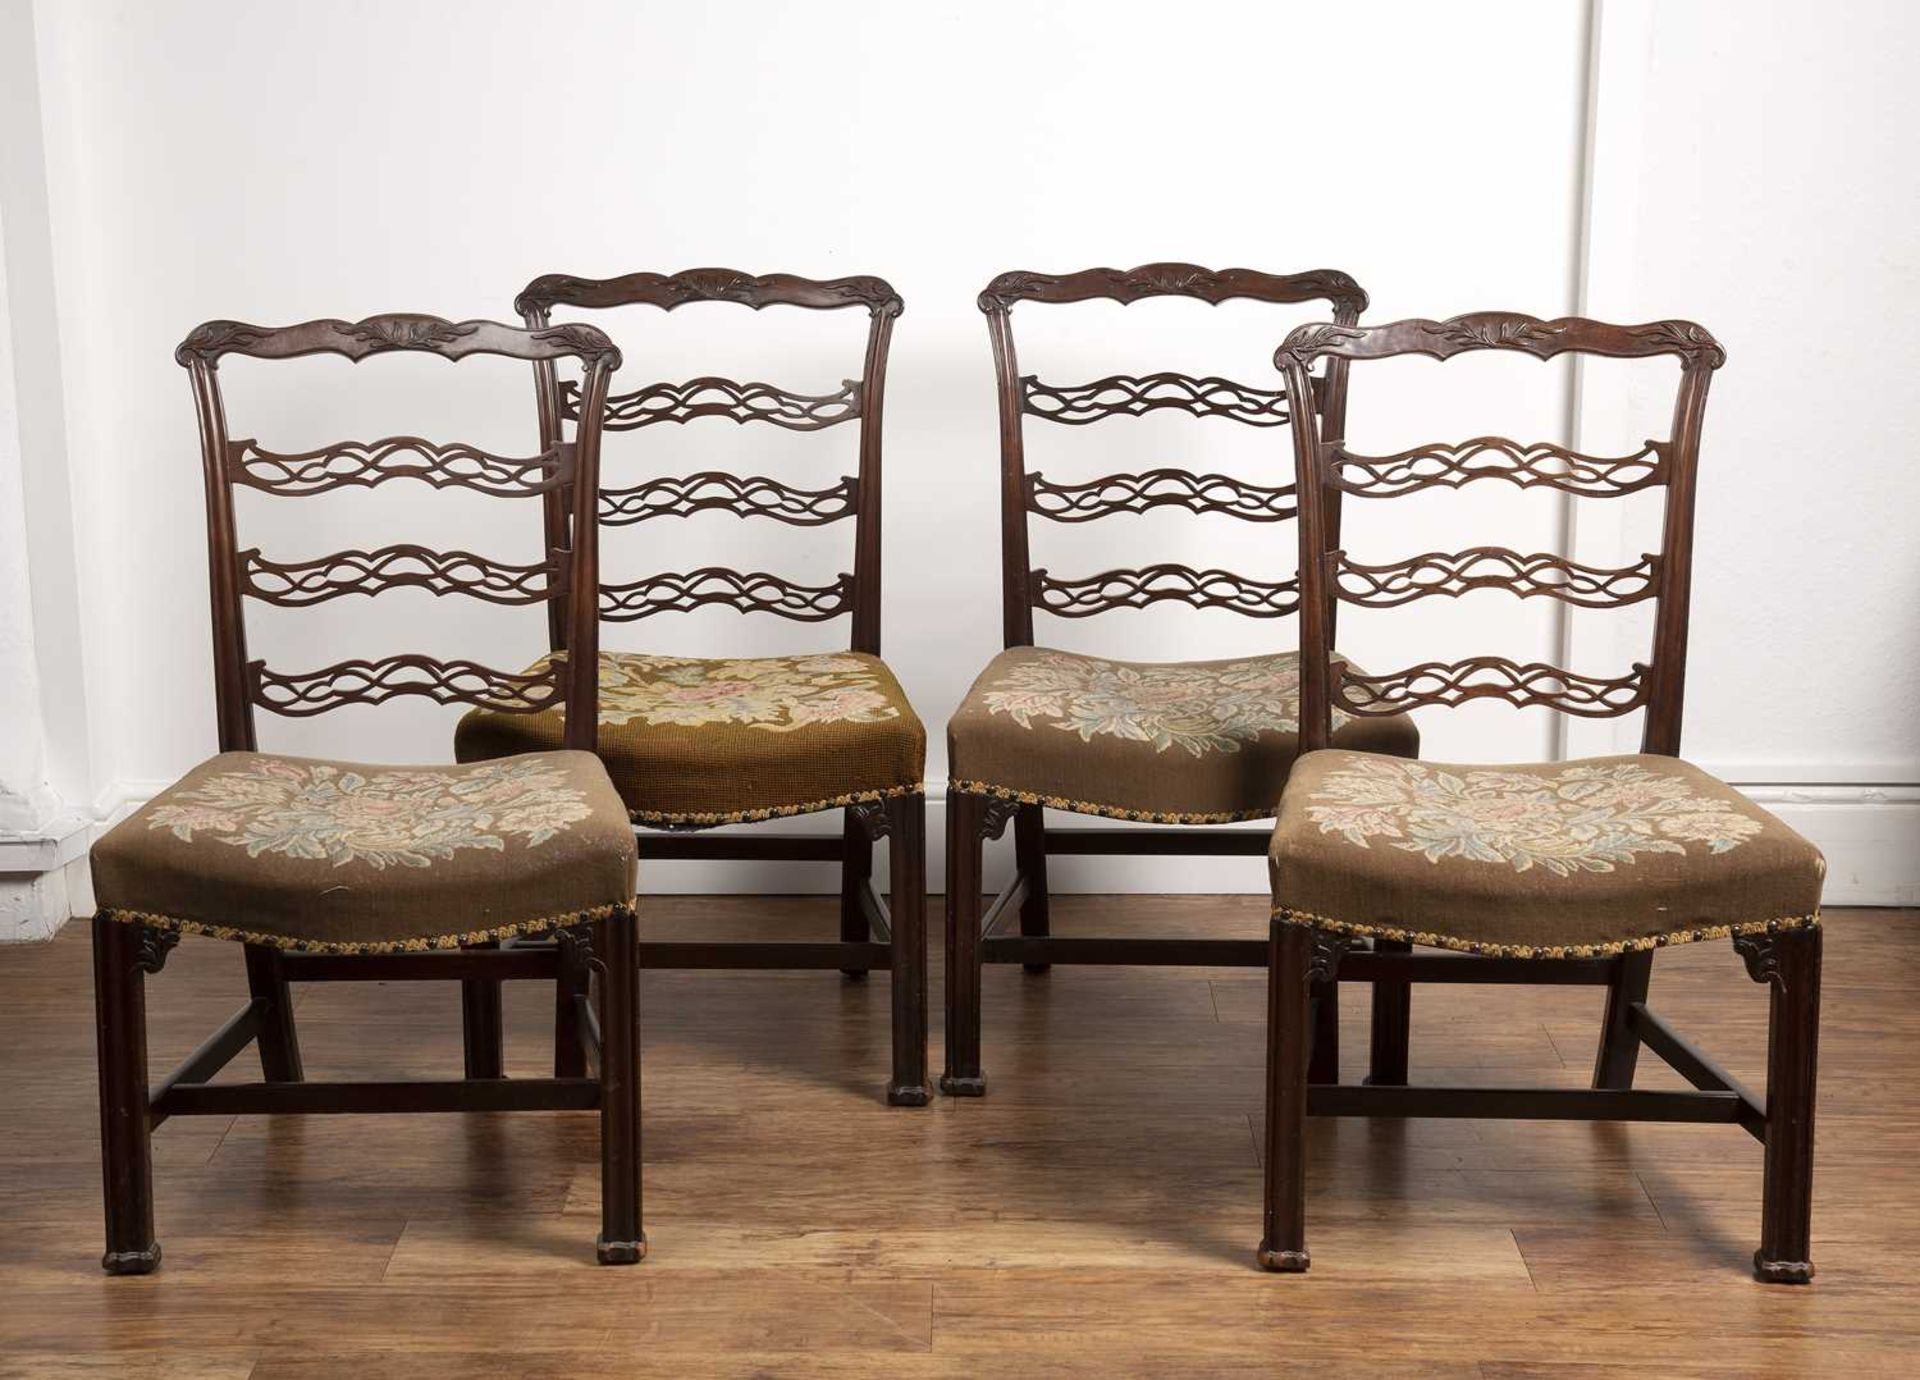 Set of four Chippendale style ladderback dining chairs 18th/19th Century, each with carved